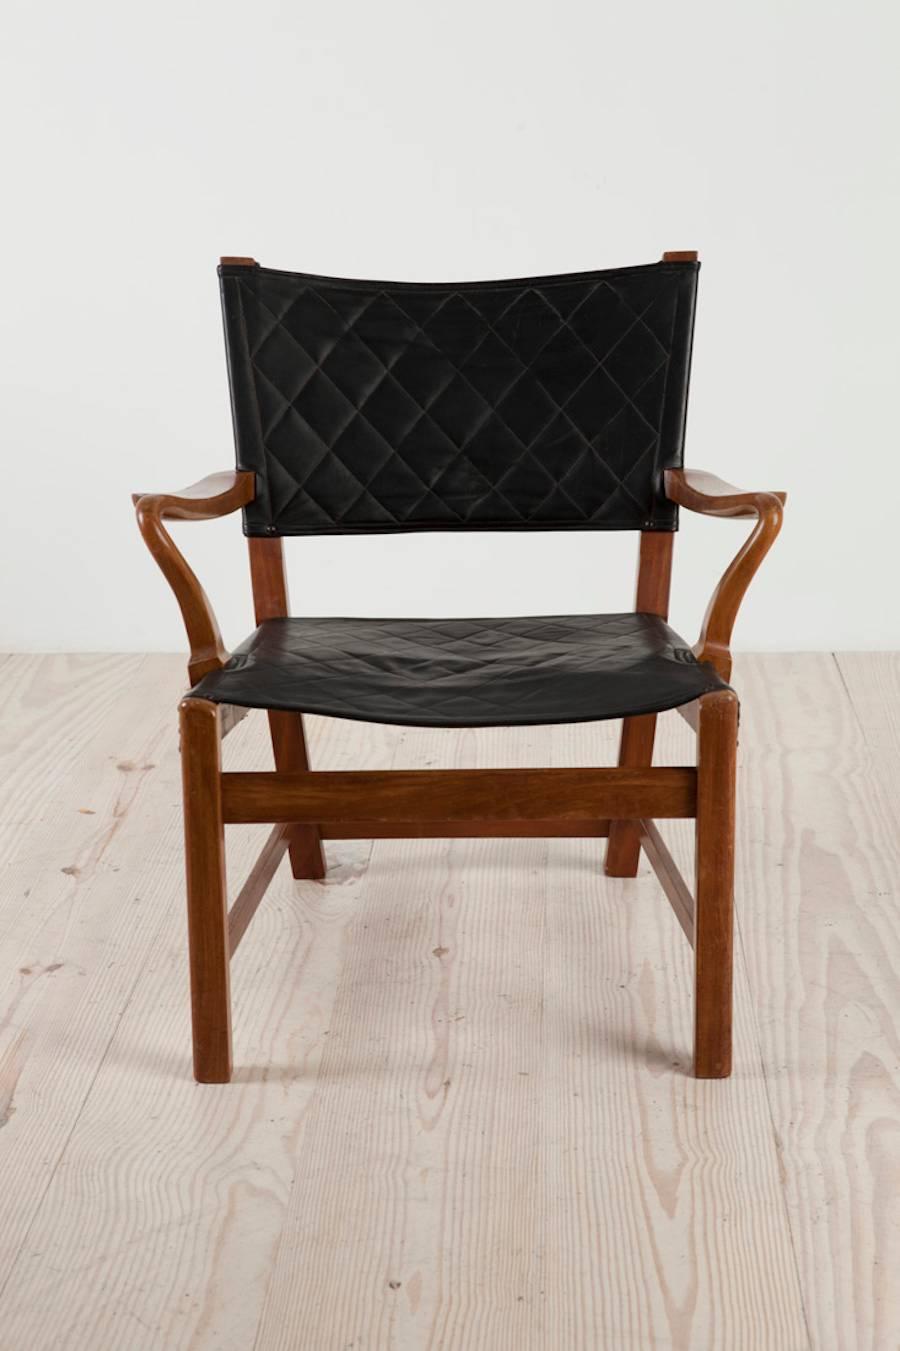 Carl Malmsten (1889 Sweden 1972), easy chair, circa 1929, in stained birch with open arms, in original quilted black leather applied to frame with nail heads, origin: Sweden.

Reference: Carl Malmsten, by Anna Greta Wahlberg, Sweden; Bokförlaget